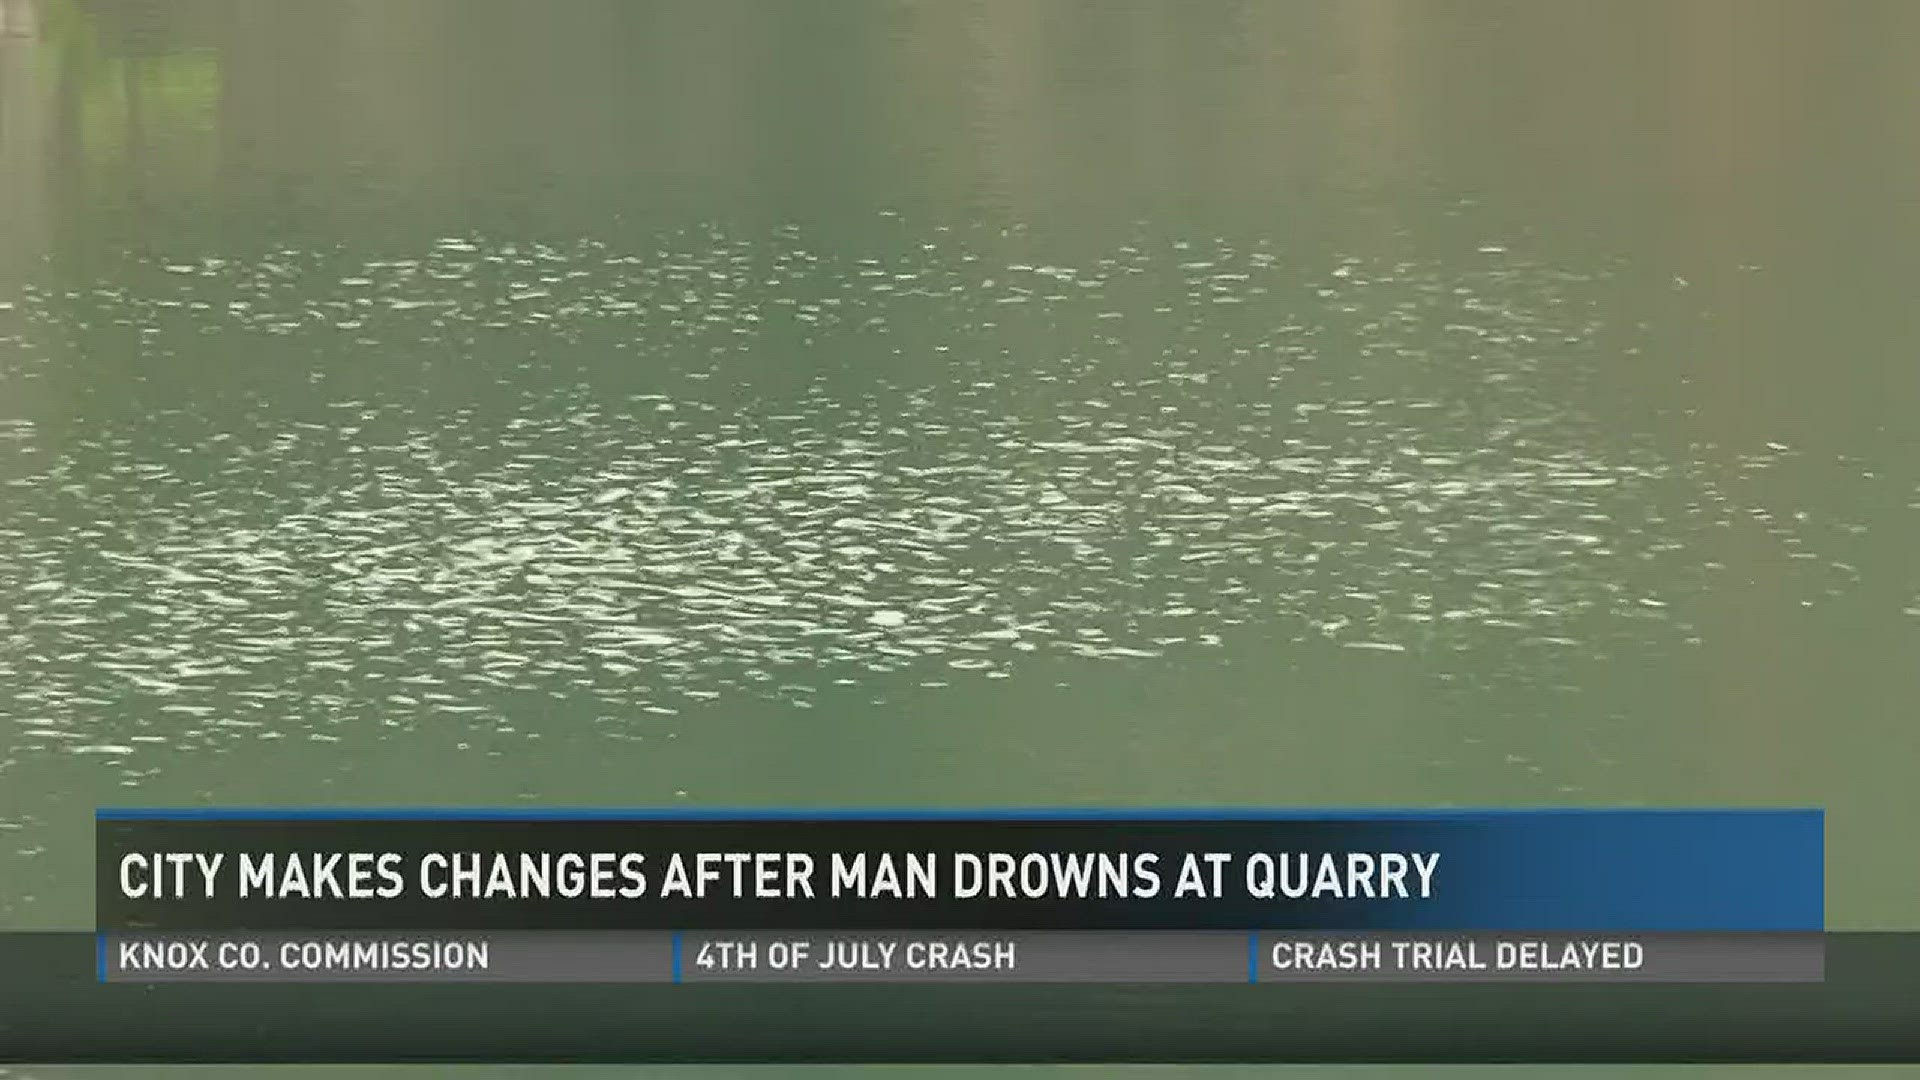 The city is making changes after a man drowns at quarry.